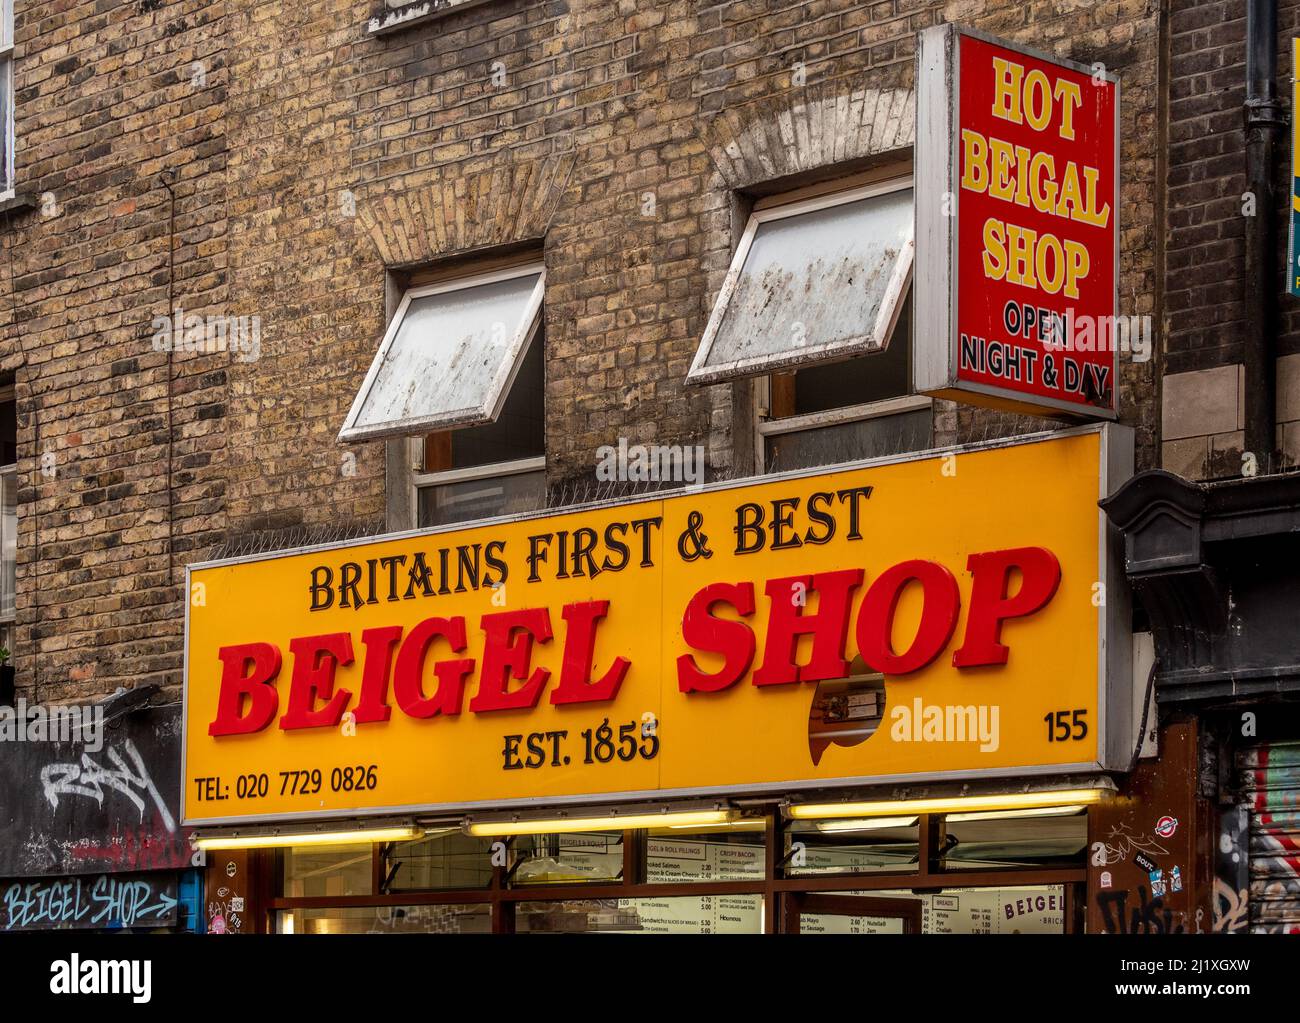 Britain's first and best Beigel Shop exterior yellow and red sign in Brick Lane. London. UK Stock Photo